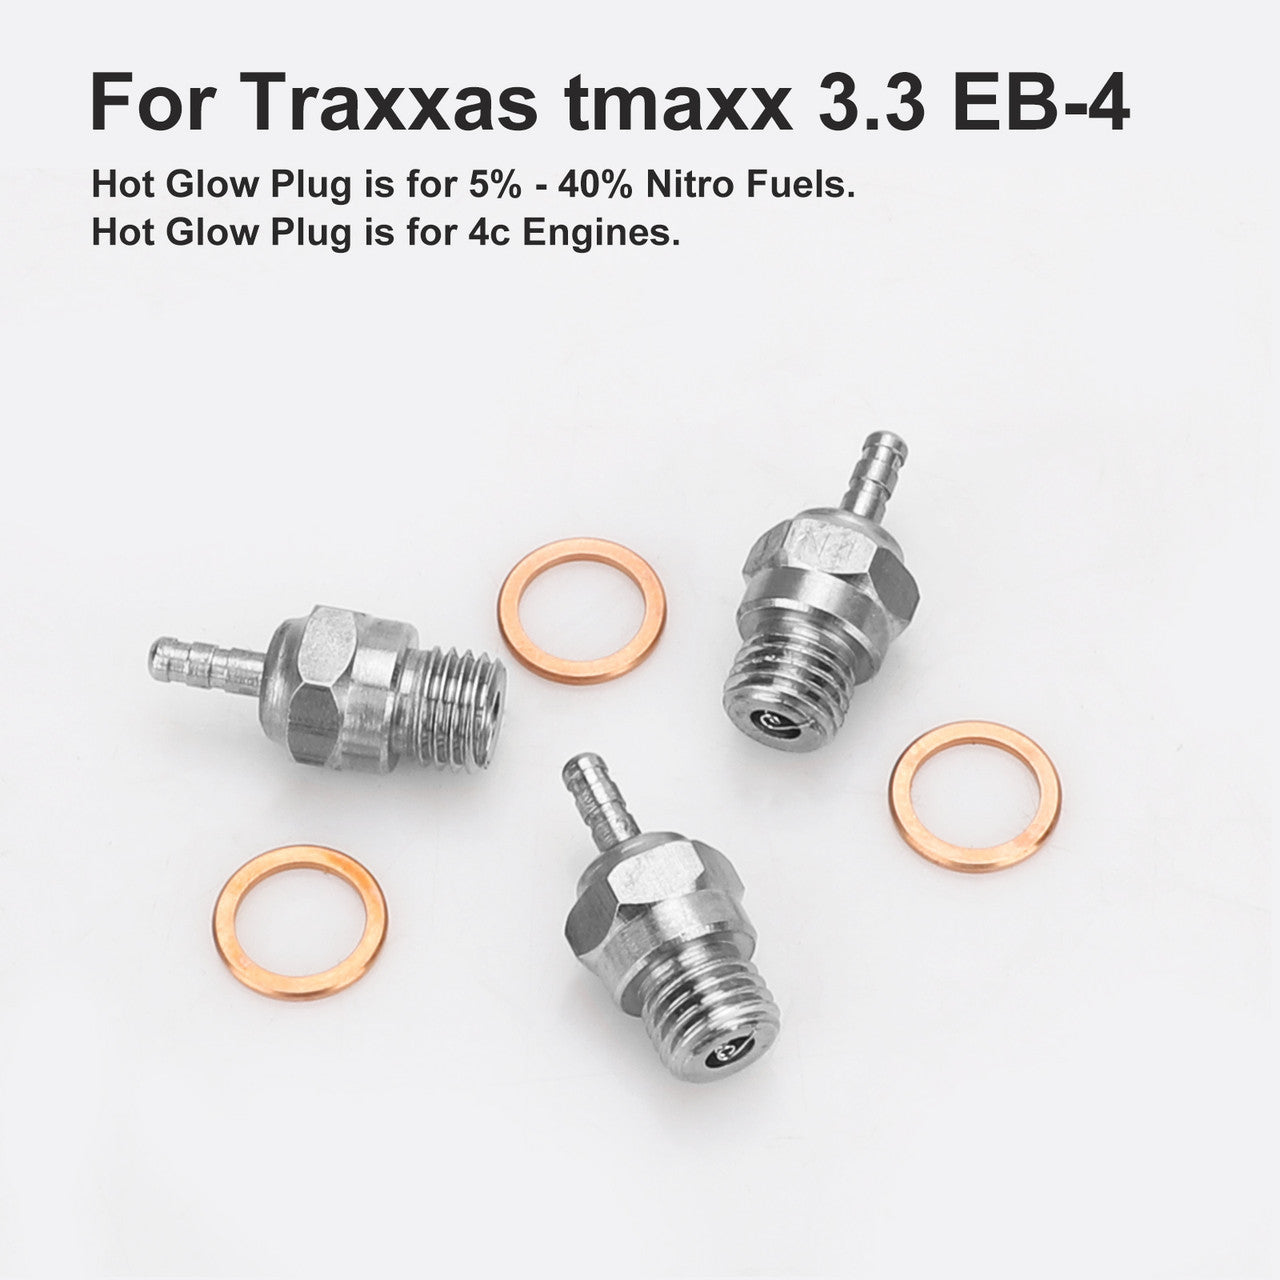 Glow Plug For Traxxas 3232X RC Cars with Improvements in Idle and Transition, 3PCS